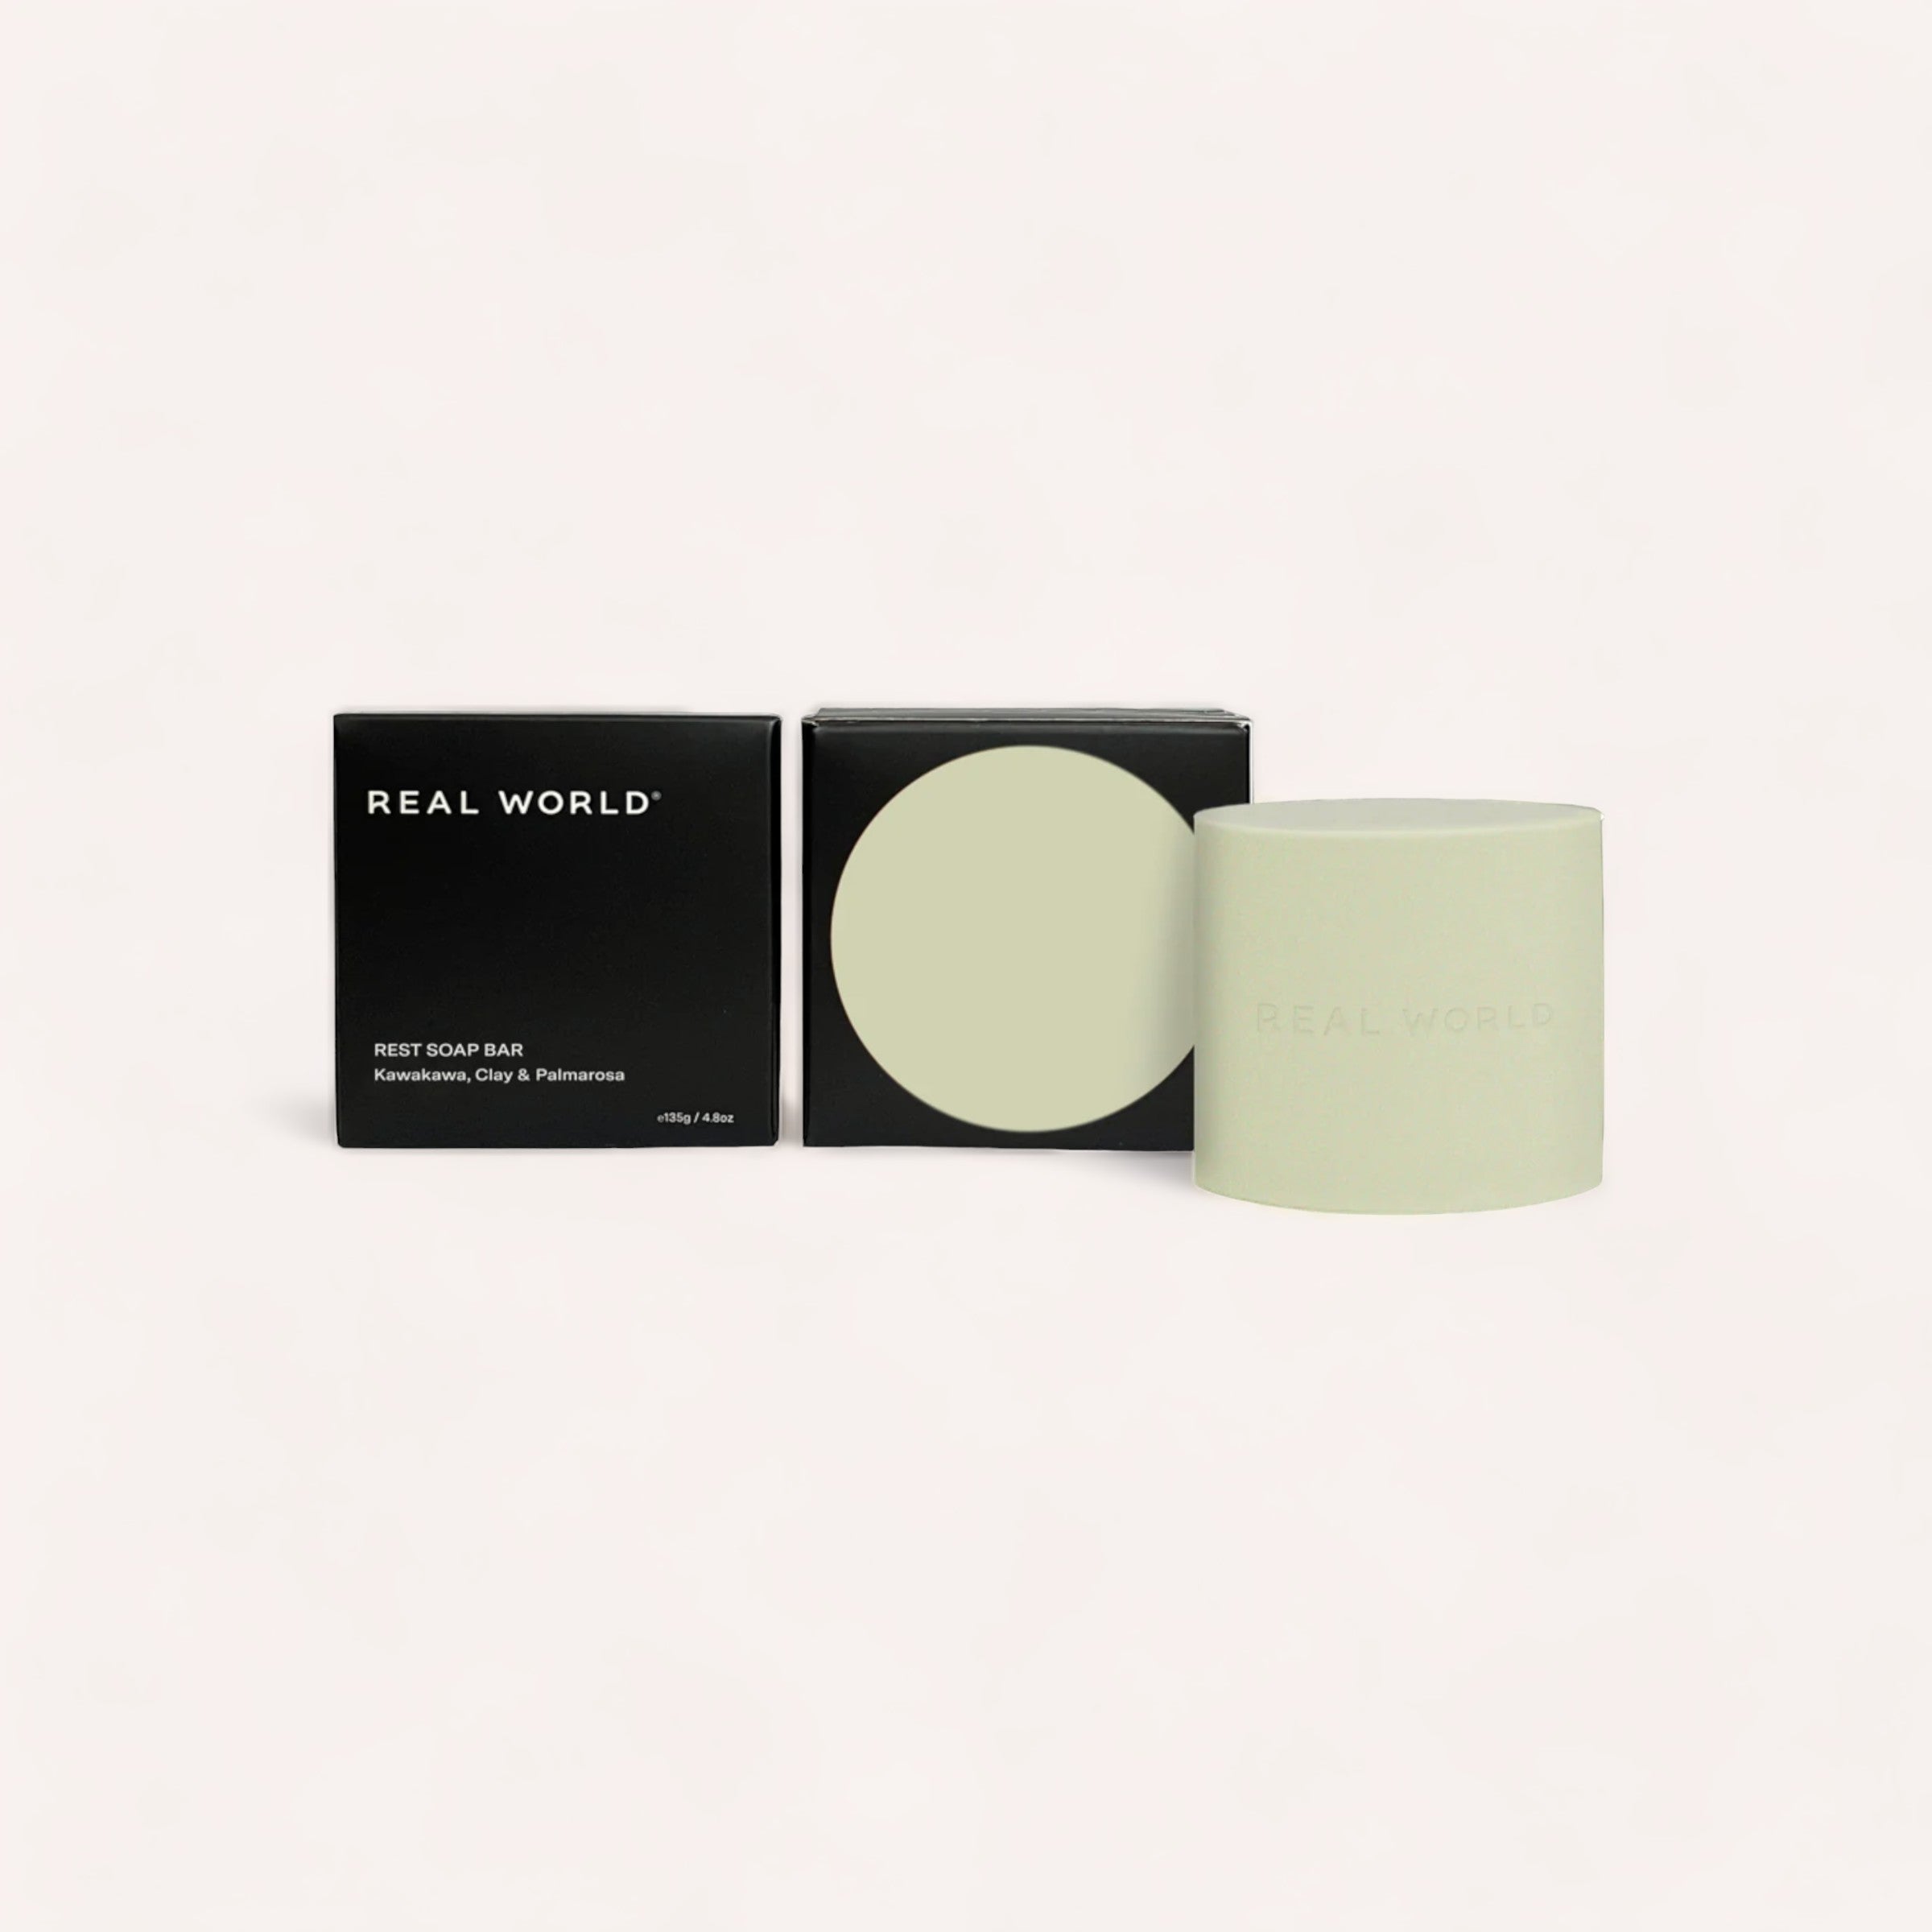 Elegant personal care products on display featuring minimalist design packaging with a Kawakawa, Clay & Palmarosa soap bar by Real World and a container for restorative cleansing.